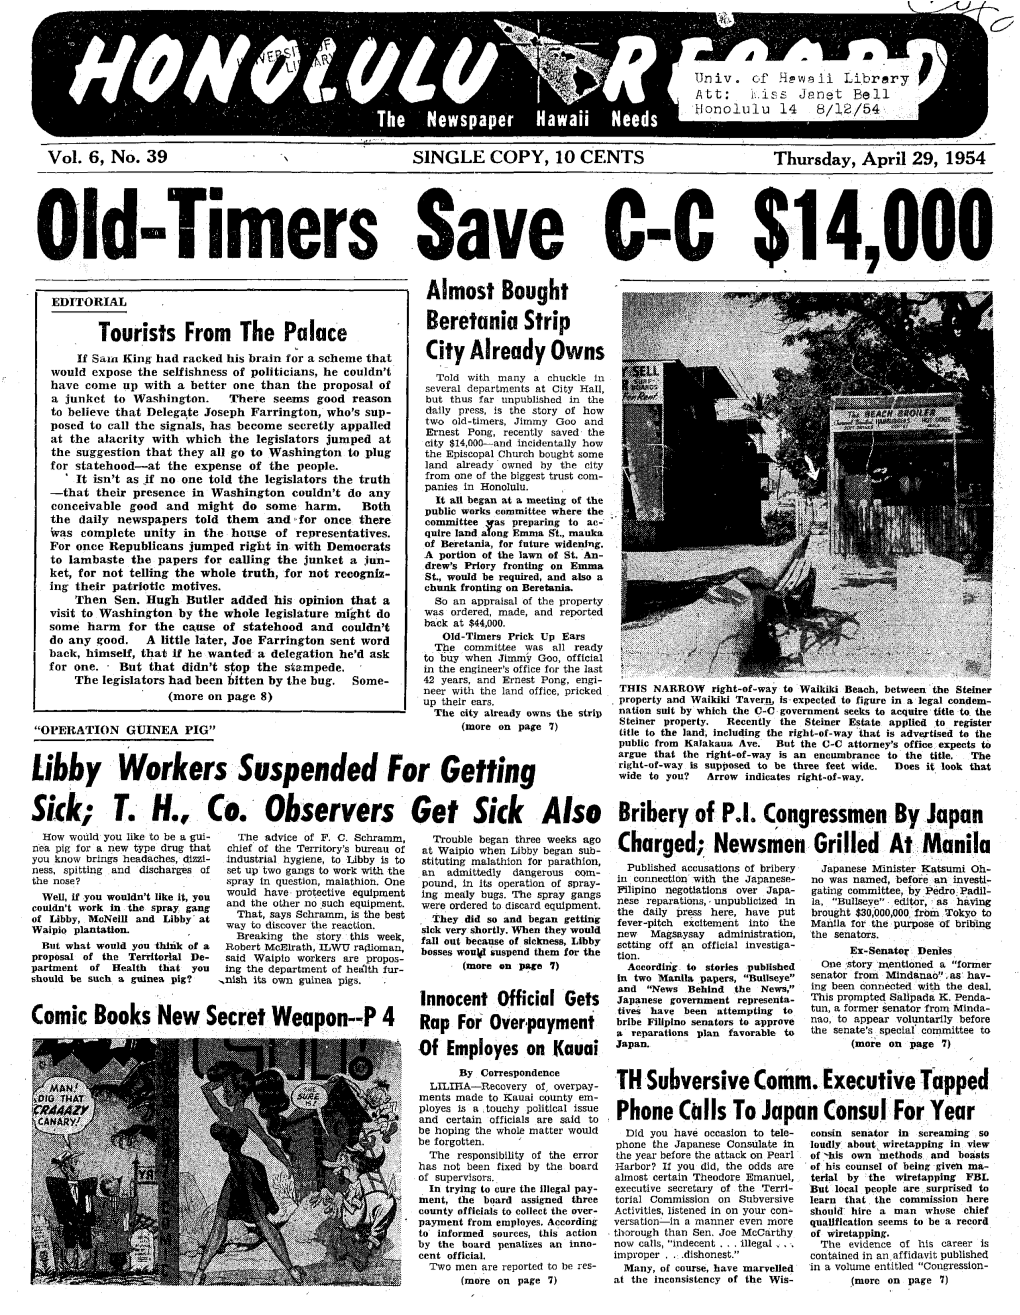 Old-Timers Save C-C $14,000